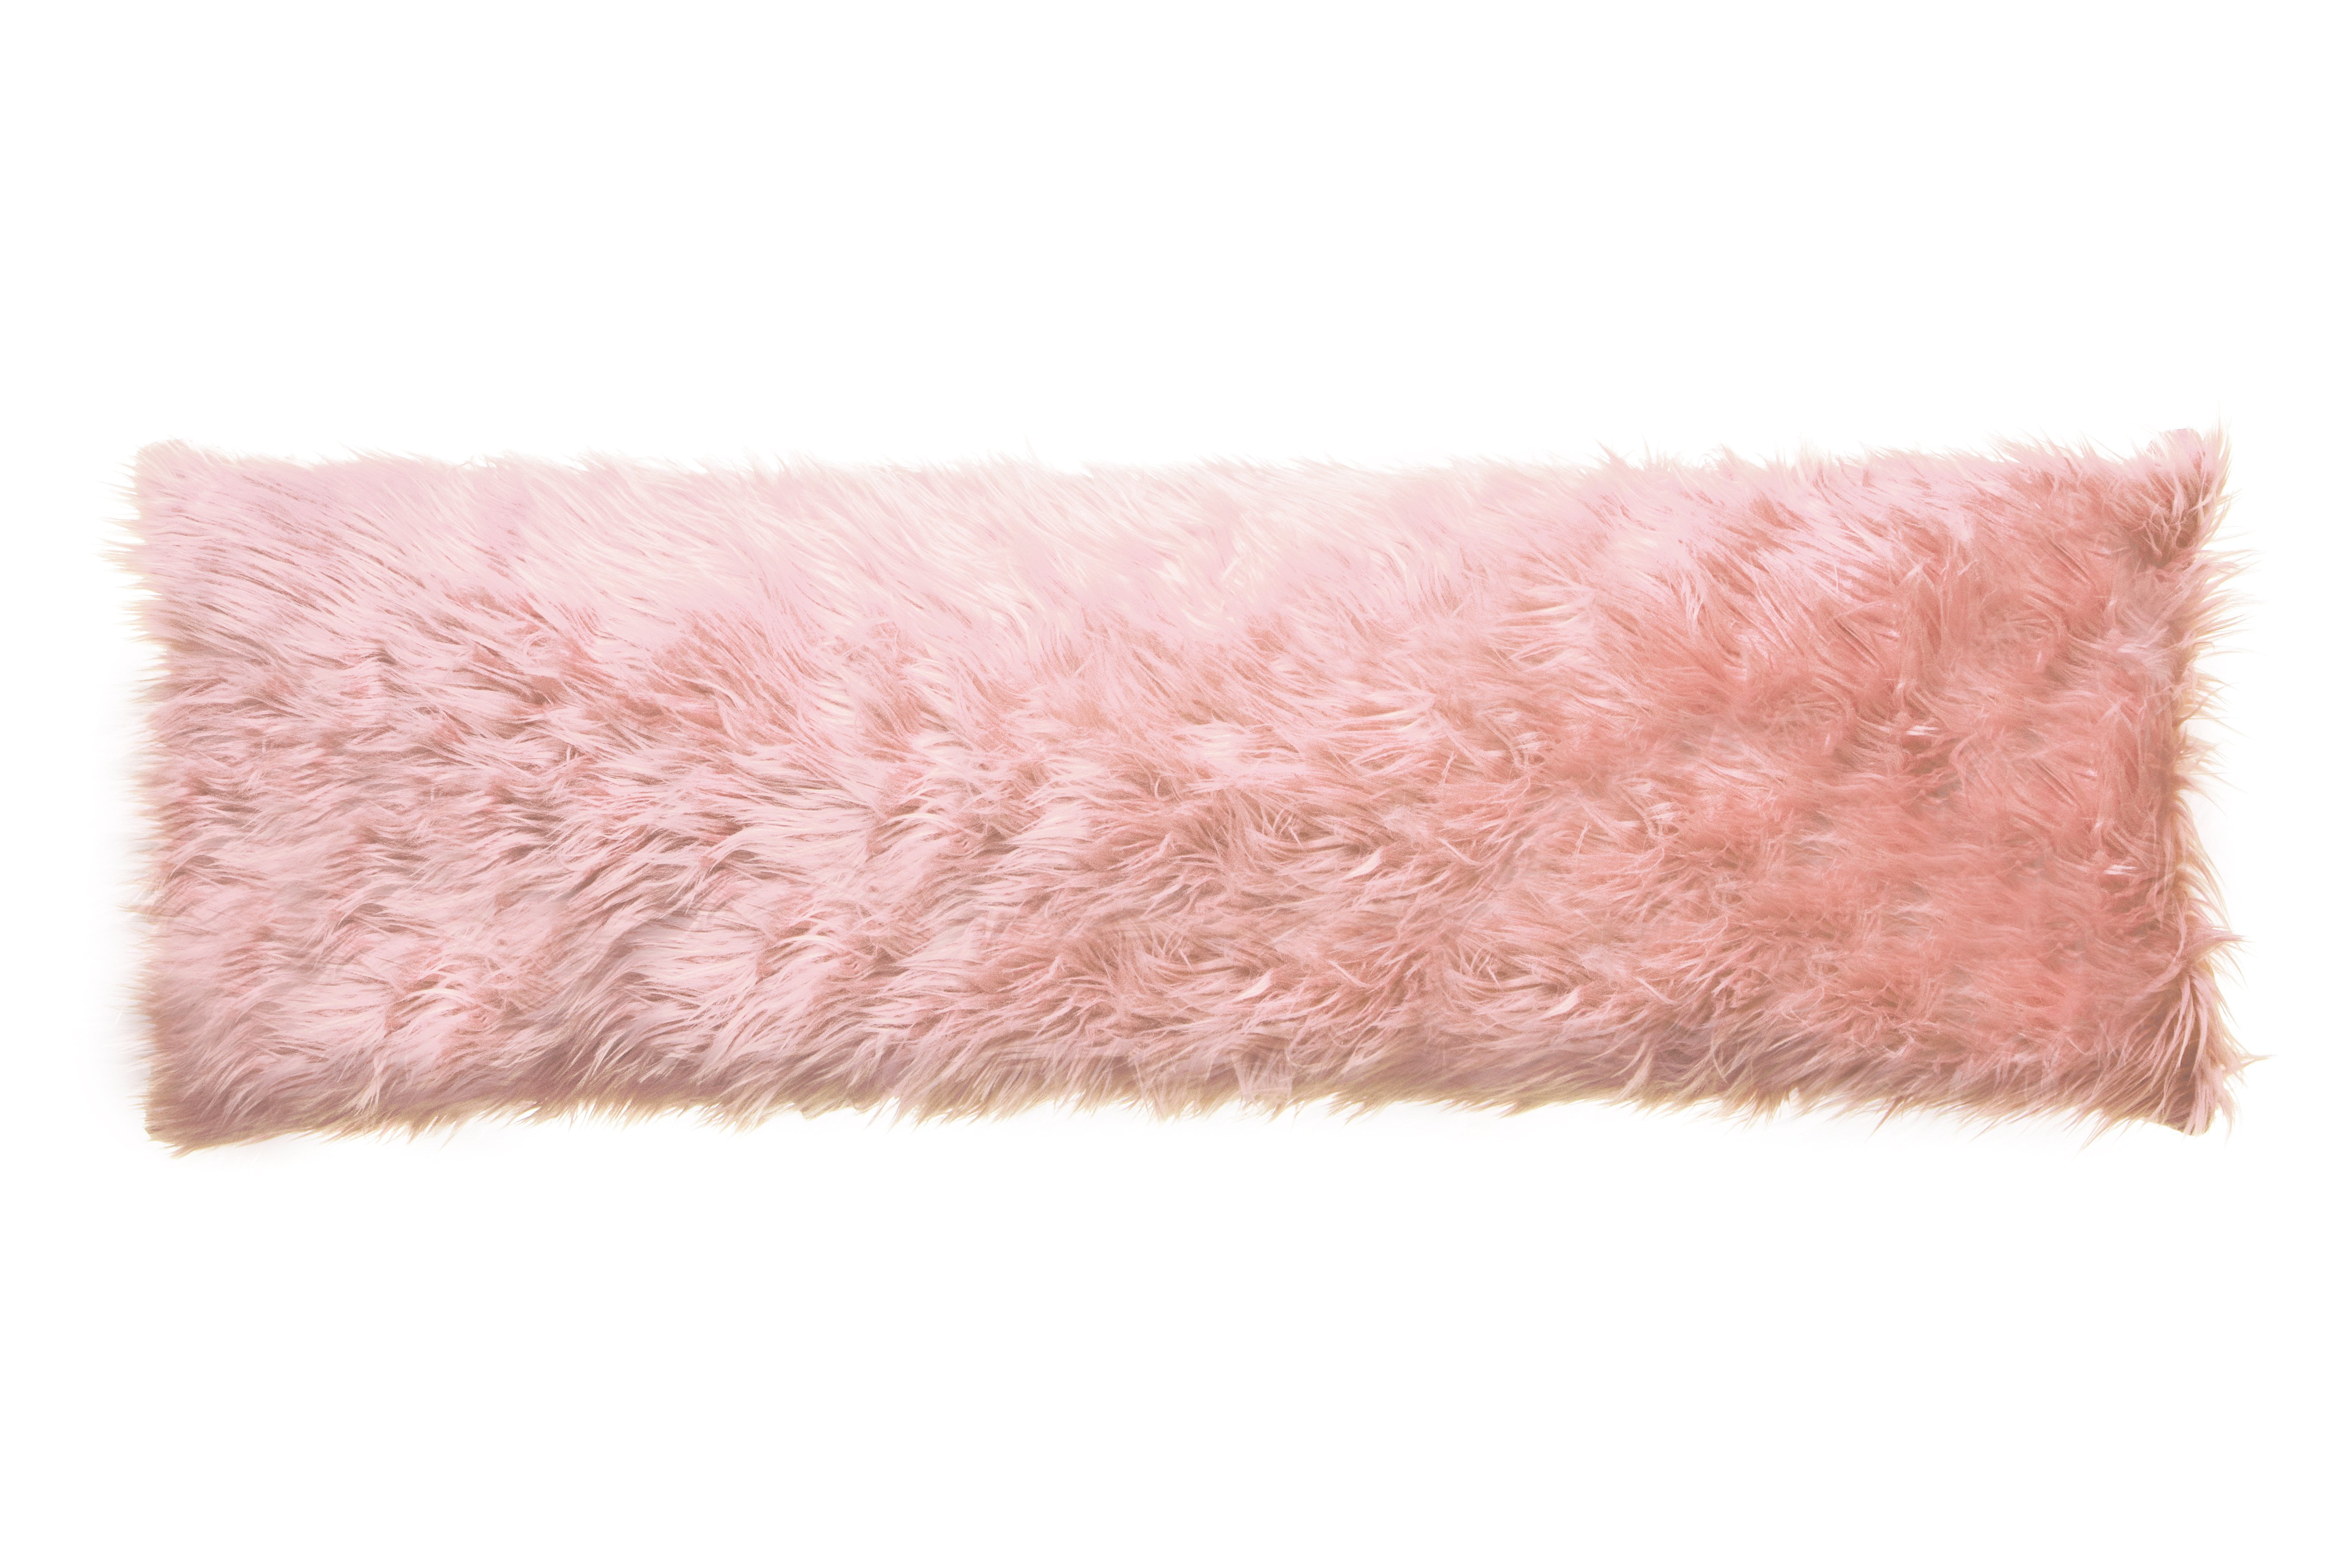 Faux Fur Body Pillow Cover, Mongolian Pink 20x54 (Cover Only) - Walmart.com